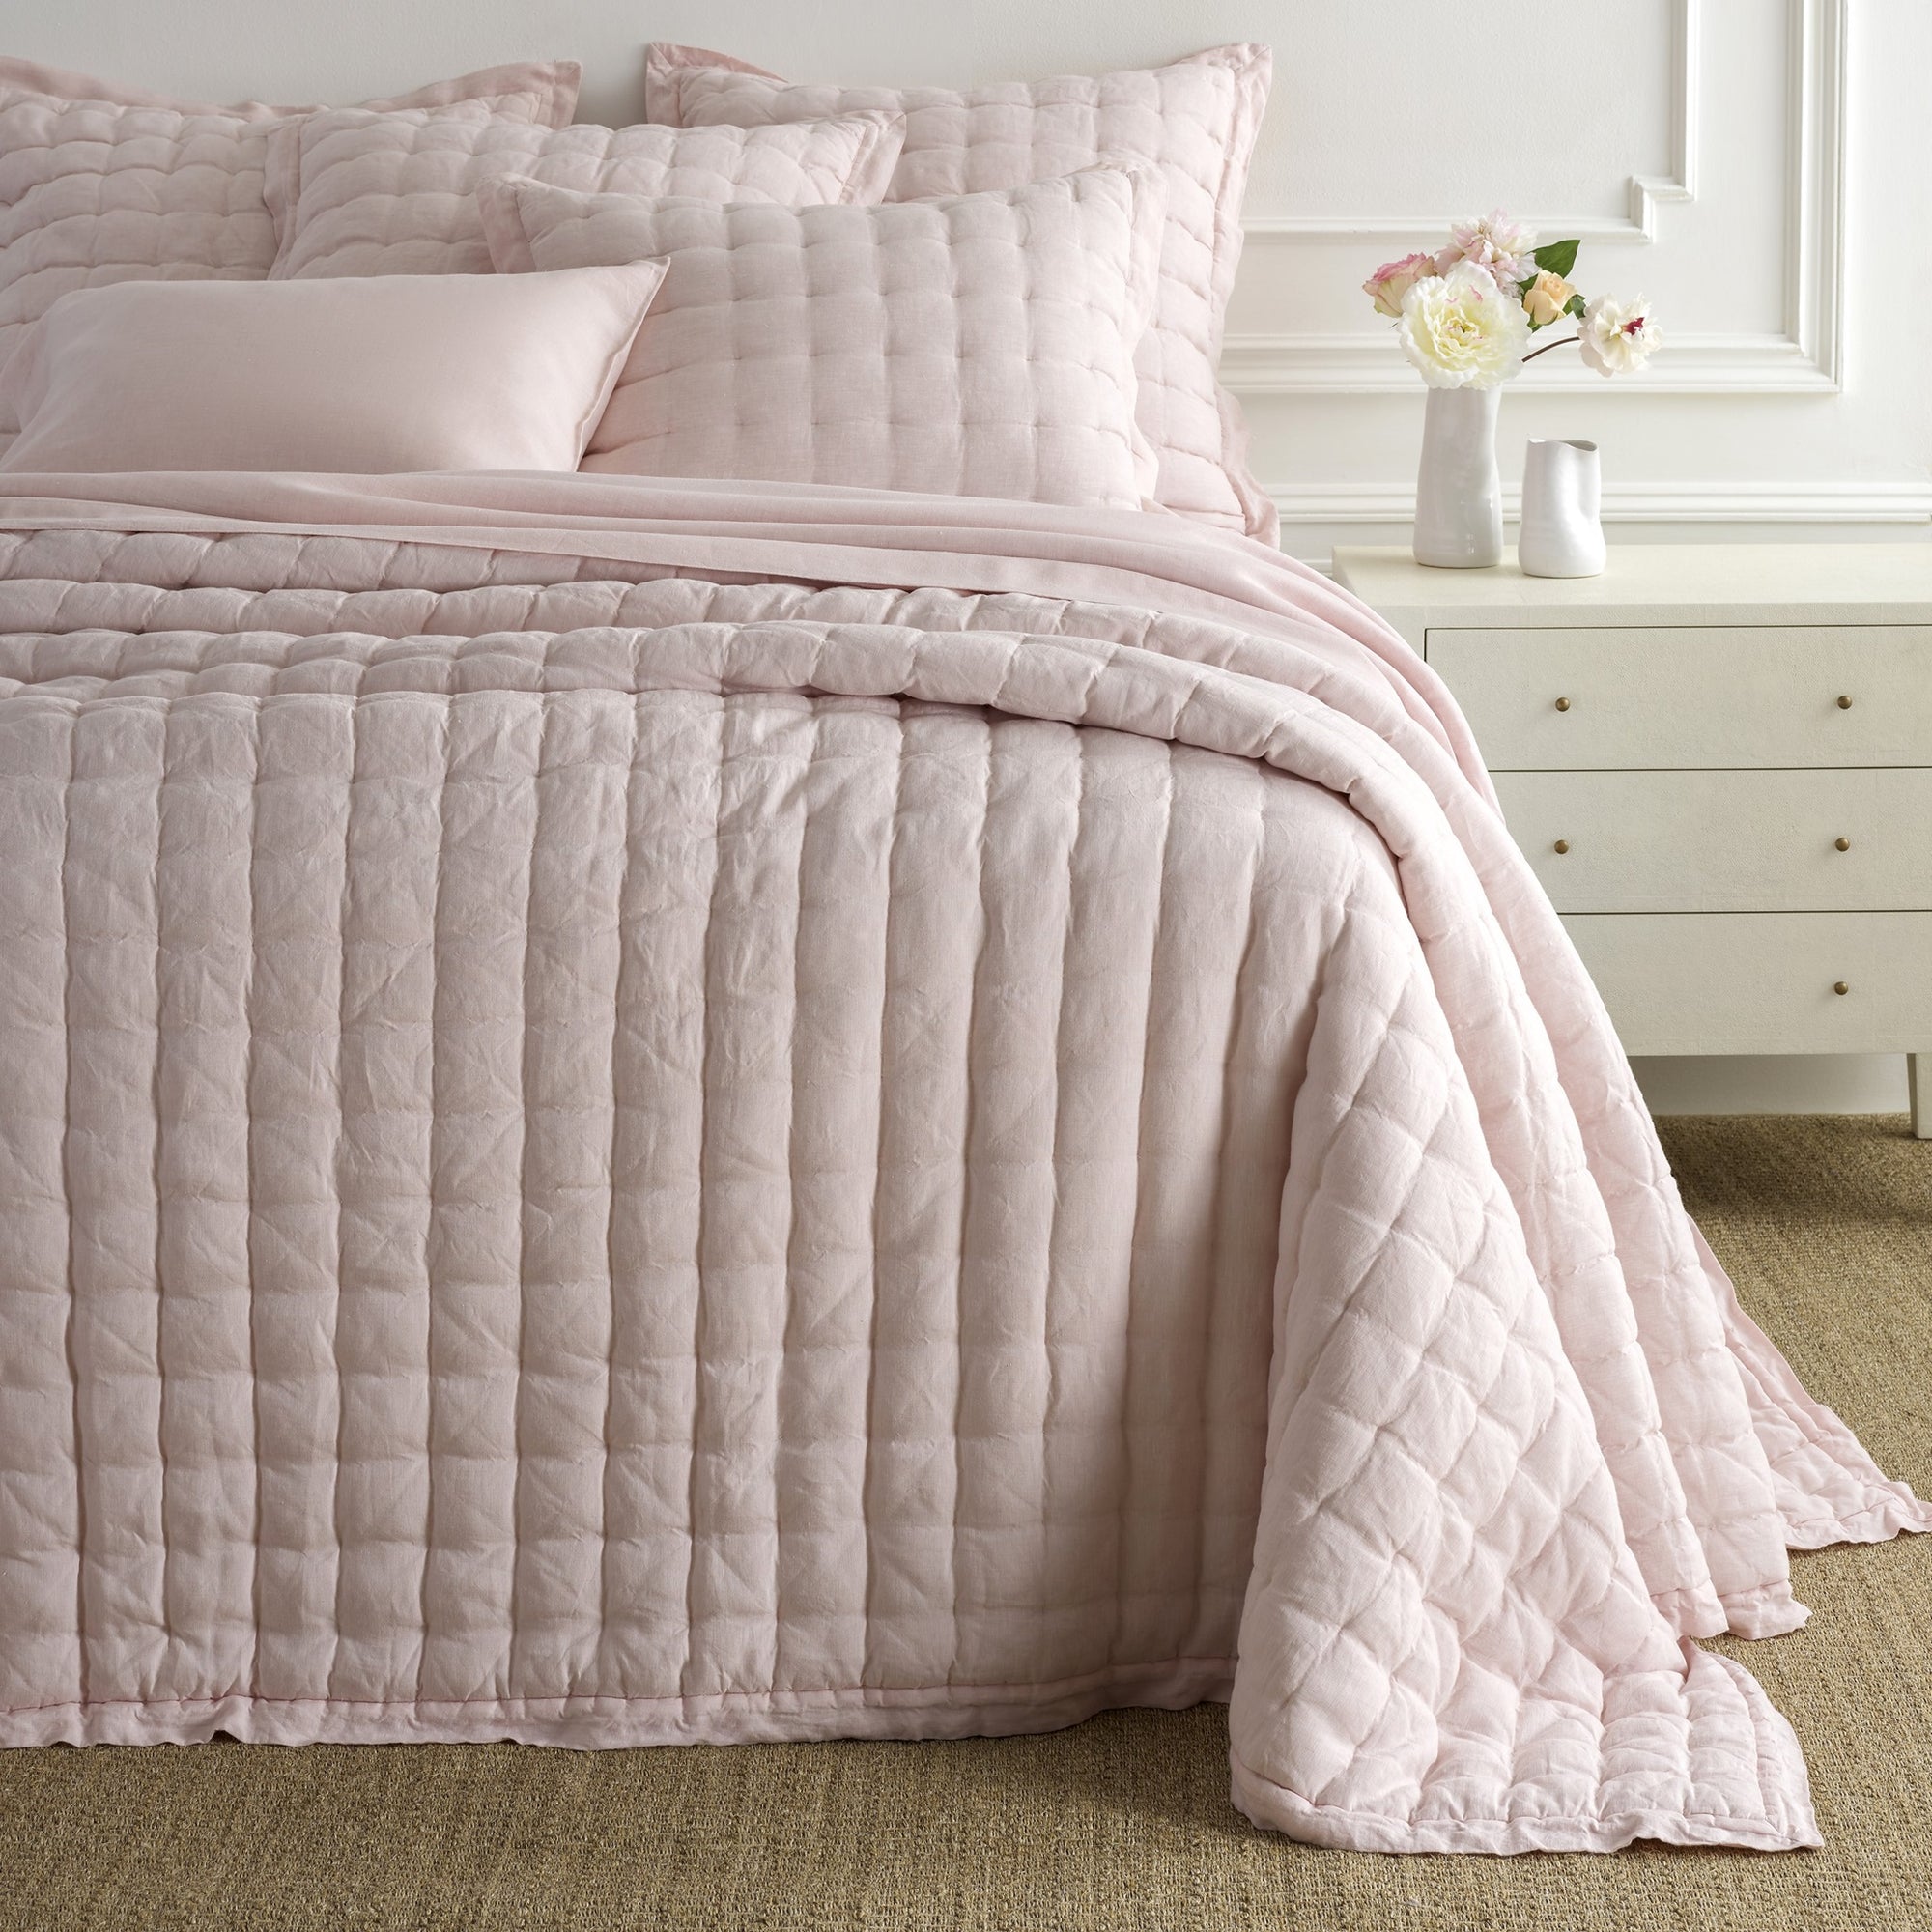 Bed Dressed in Pine Cone Hill Lush Linen Puff in Color Slipper Pink